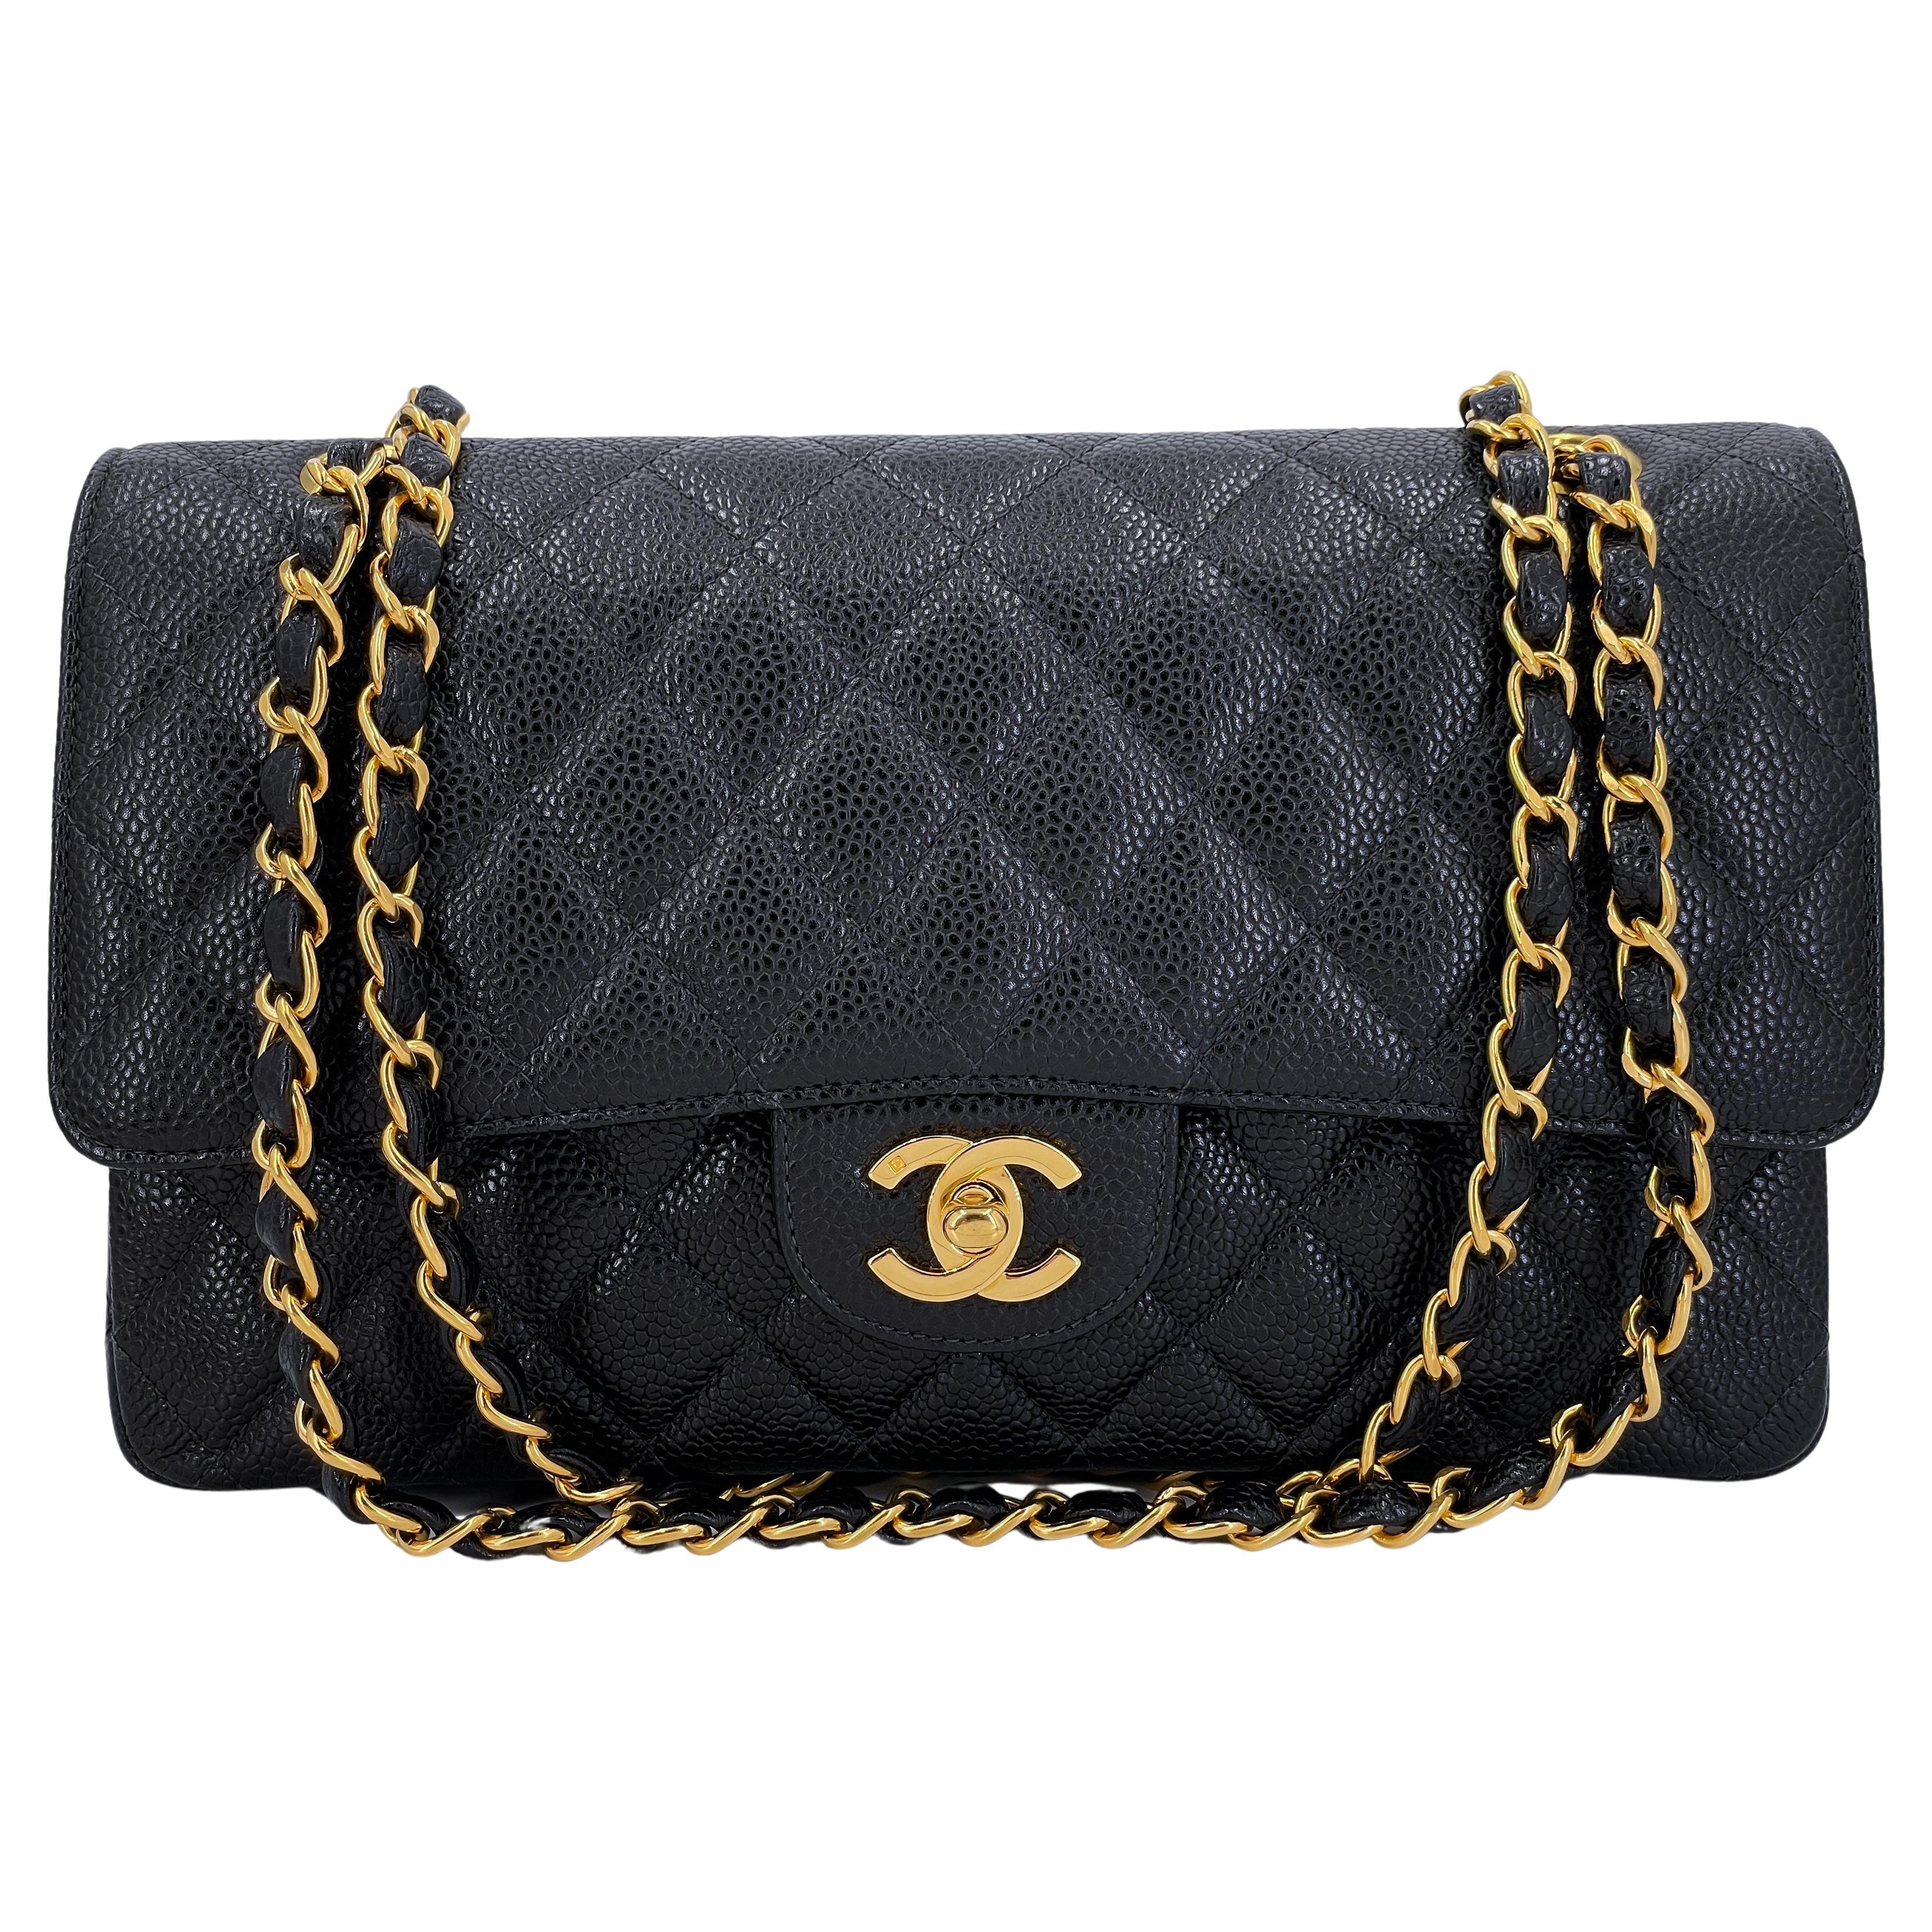 black chanel quilted handbag leather